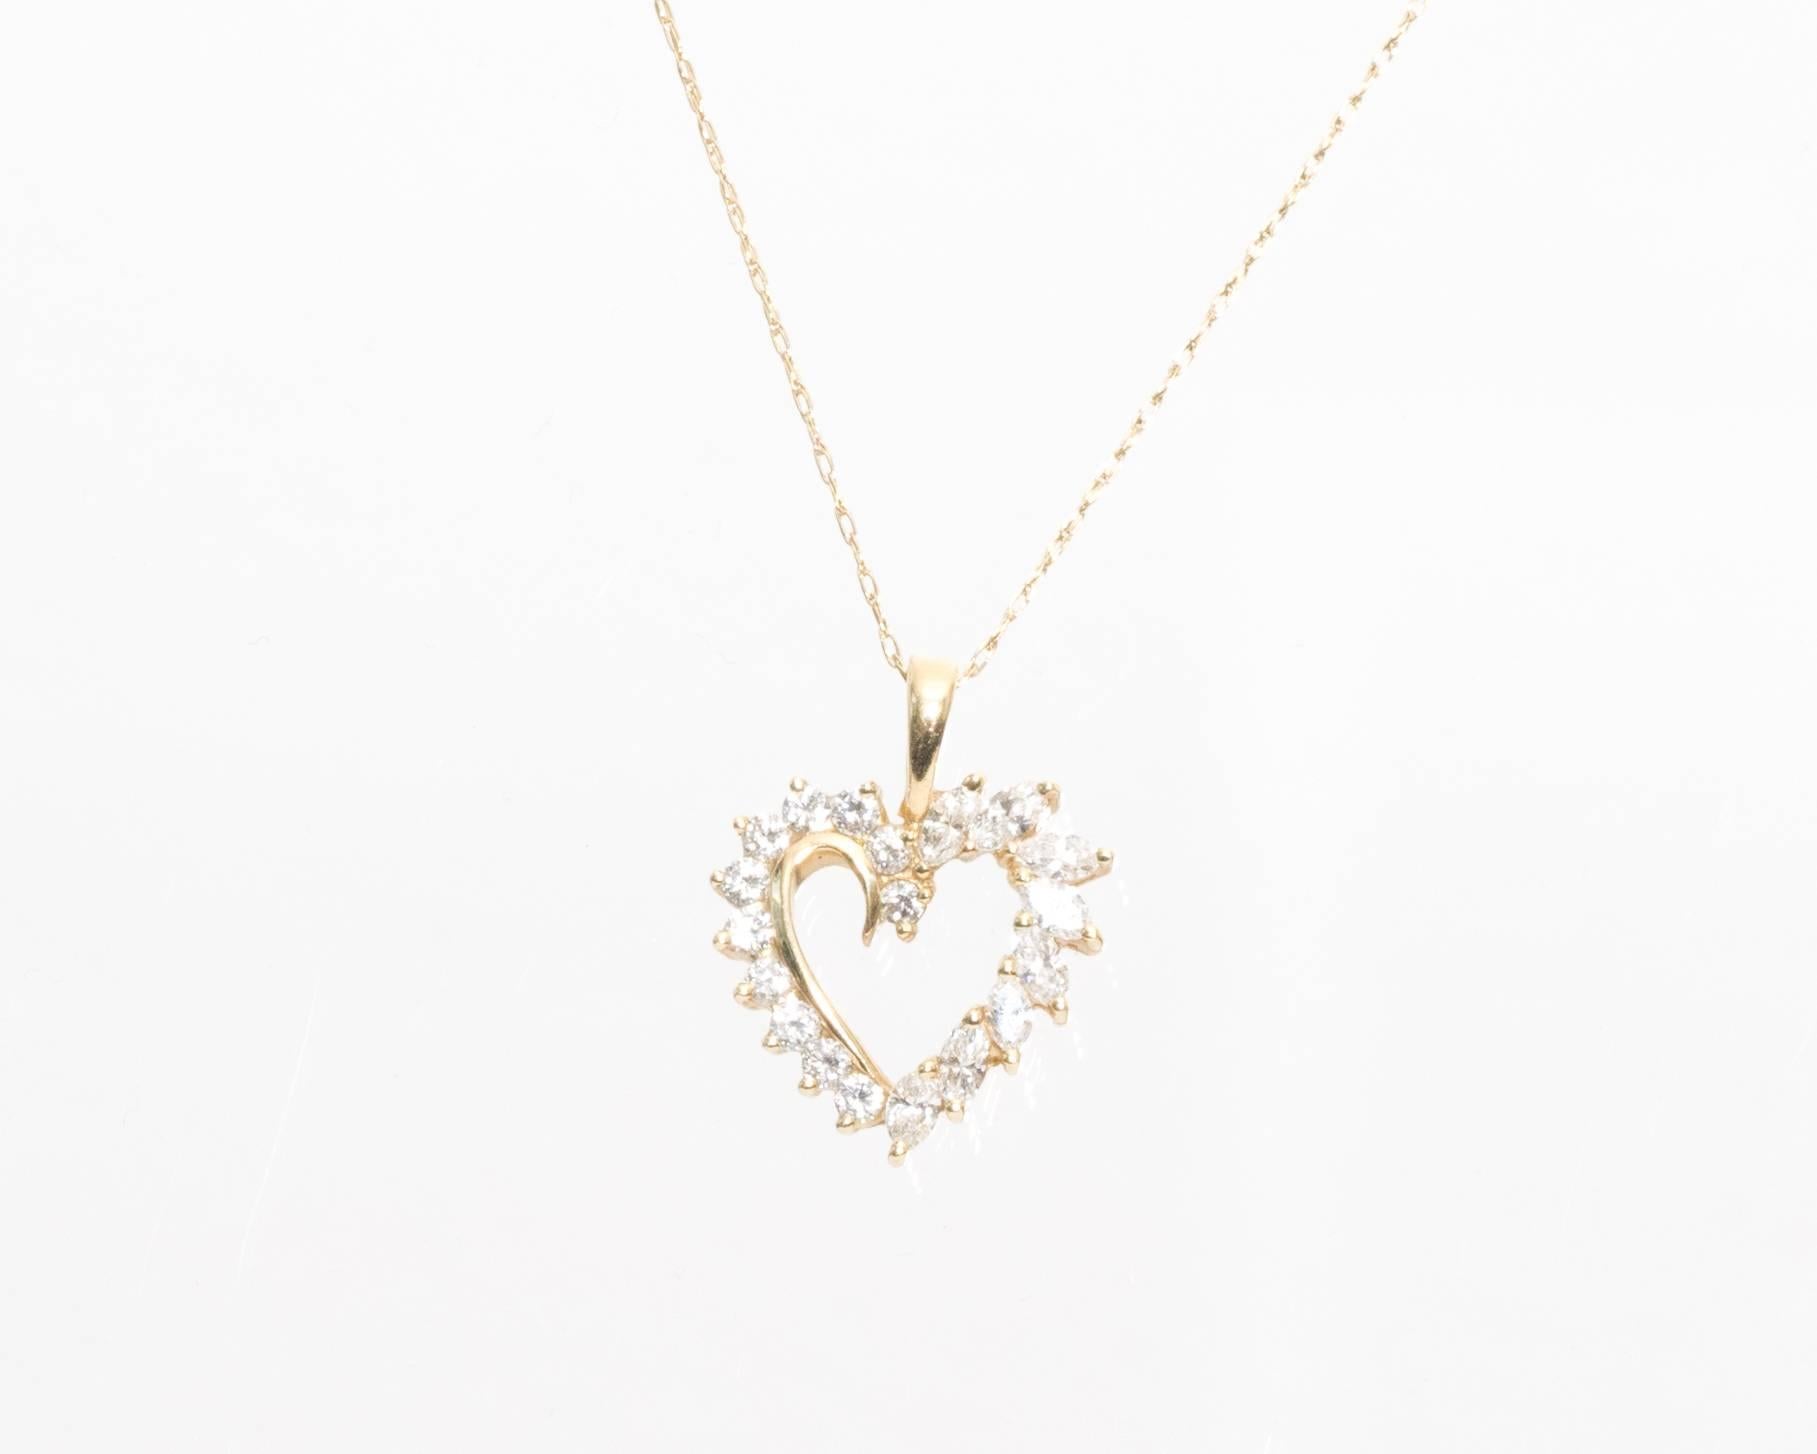 1950s Heart shape Diamond Pendant with a 19-Inch Chain
Custom Made
Crafted in 14 Karat Yellow Gold

Heart Shape Pendant features 0.75 carats total of Diamonds
F-H Color, VS-SI Clarity
11 Round Brilliant Cut Diamonds make up half of the pendant (on